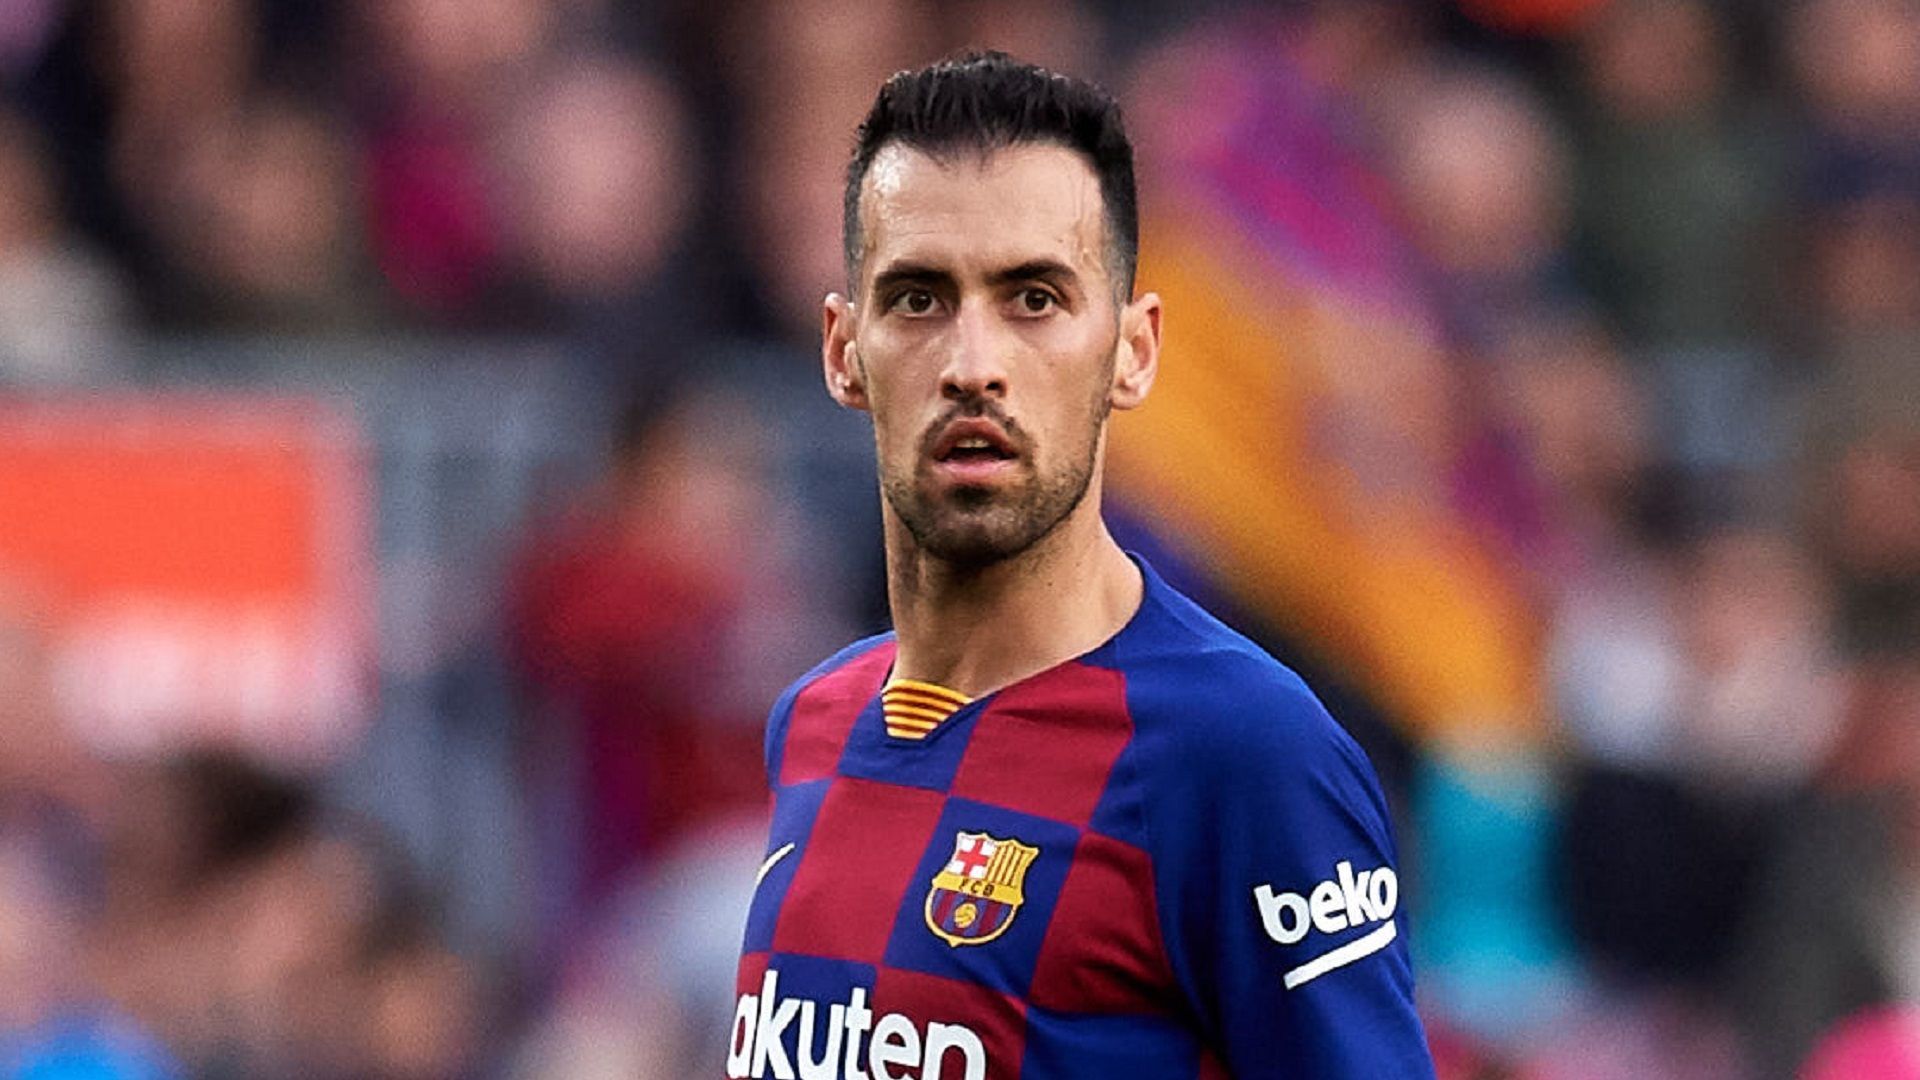 Busquets is Barcelona's most important player alongside Messi